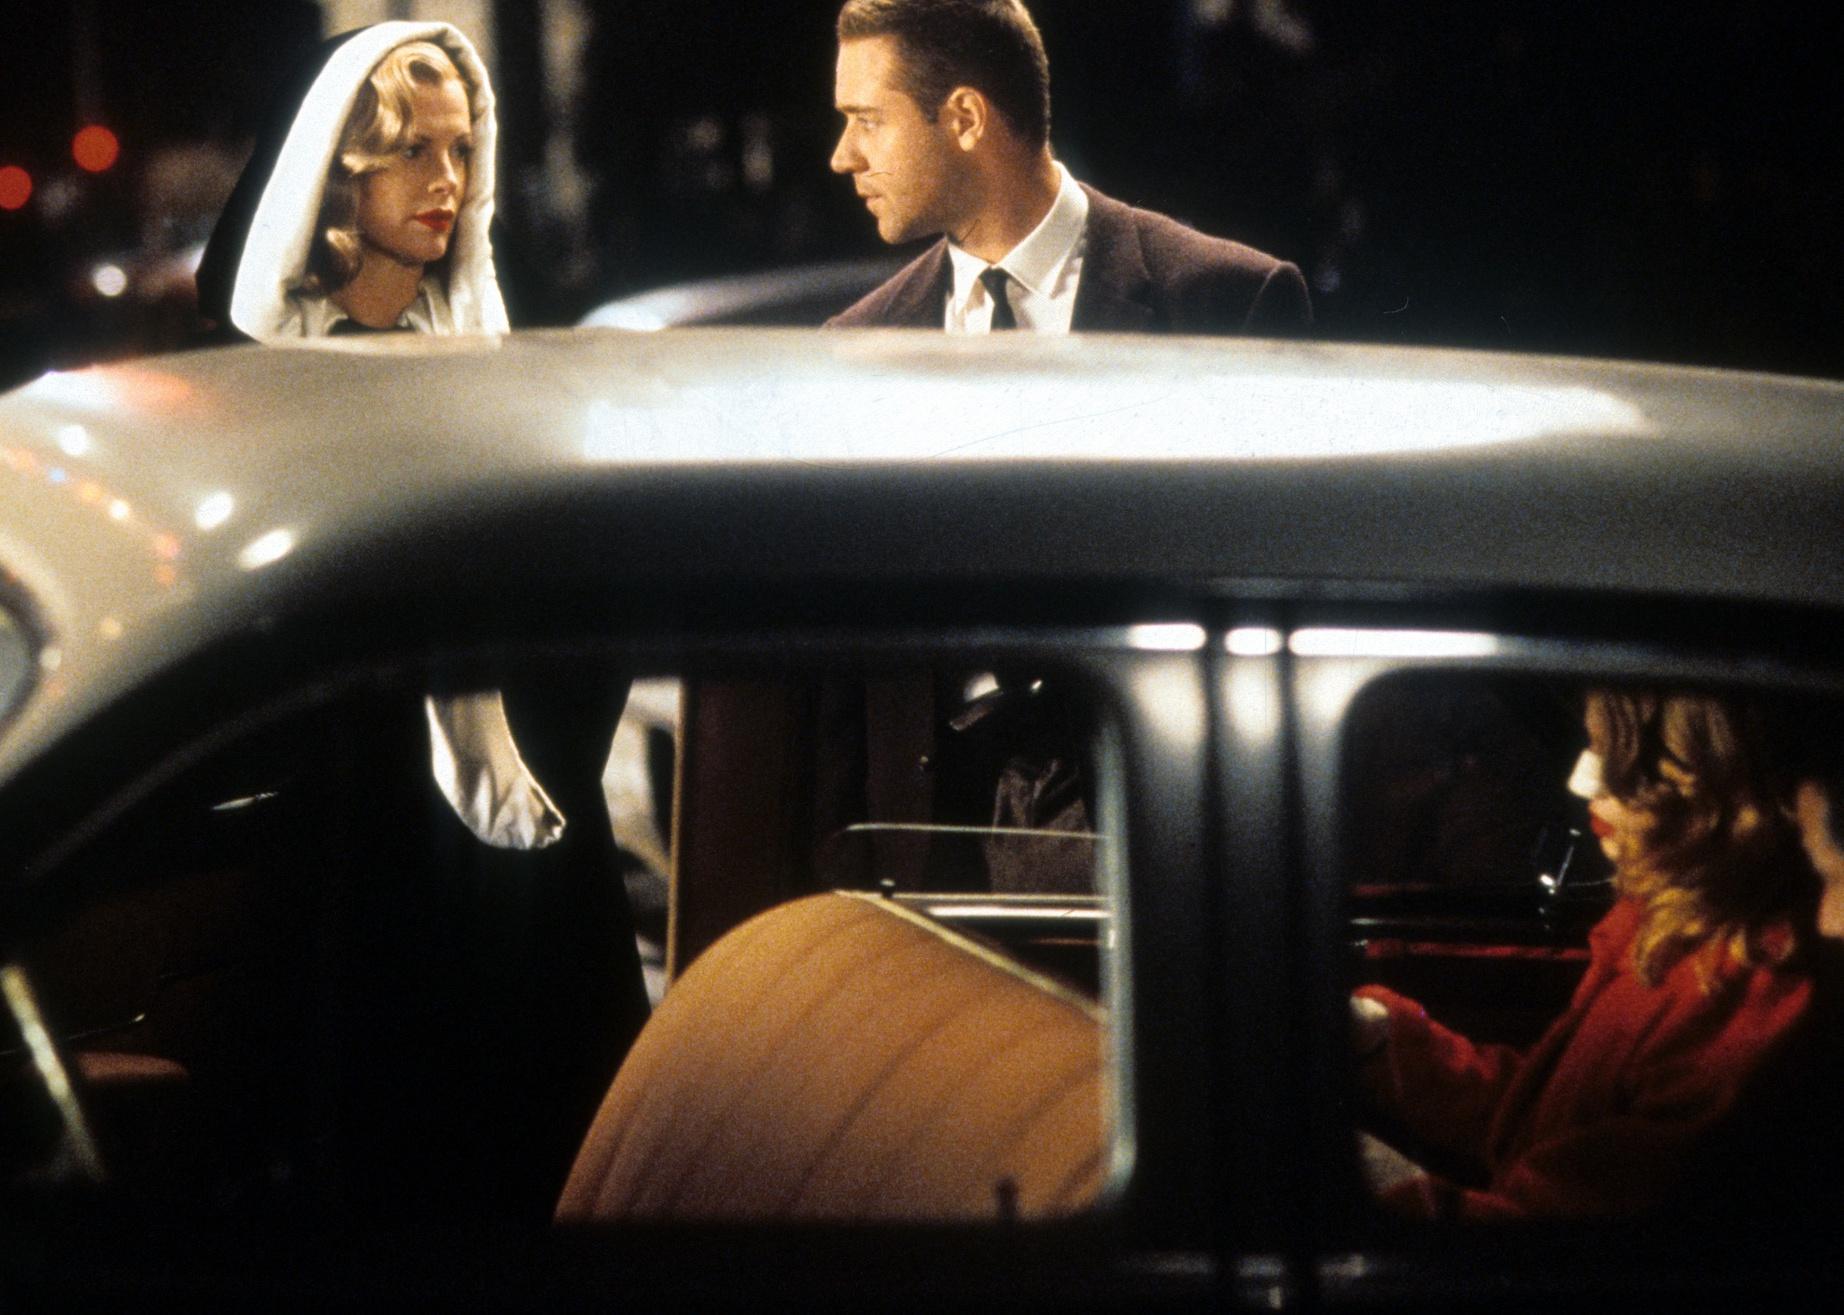 Kim Basinger and Russell Crowe stand dressed up and talking outside a classic car.